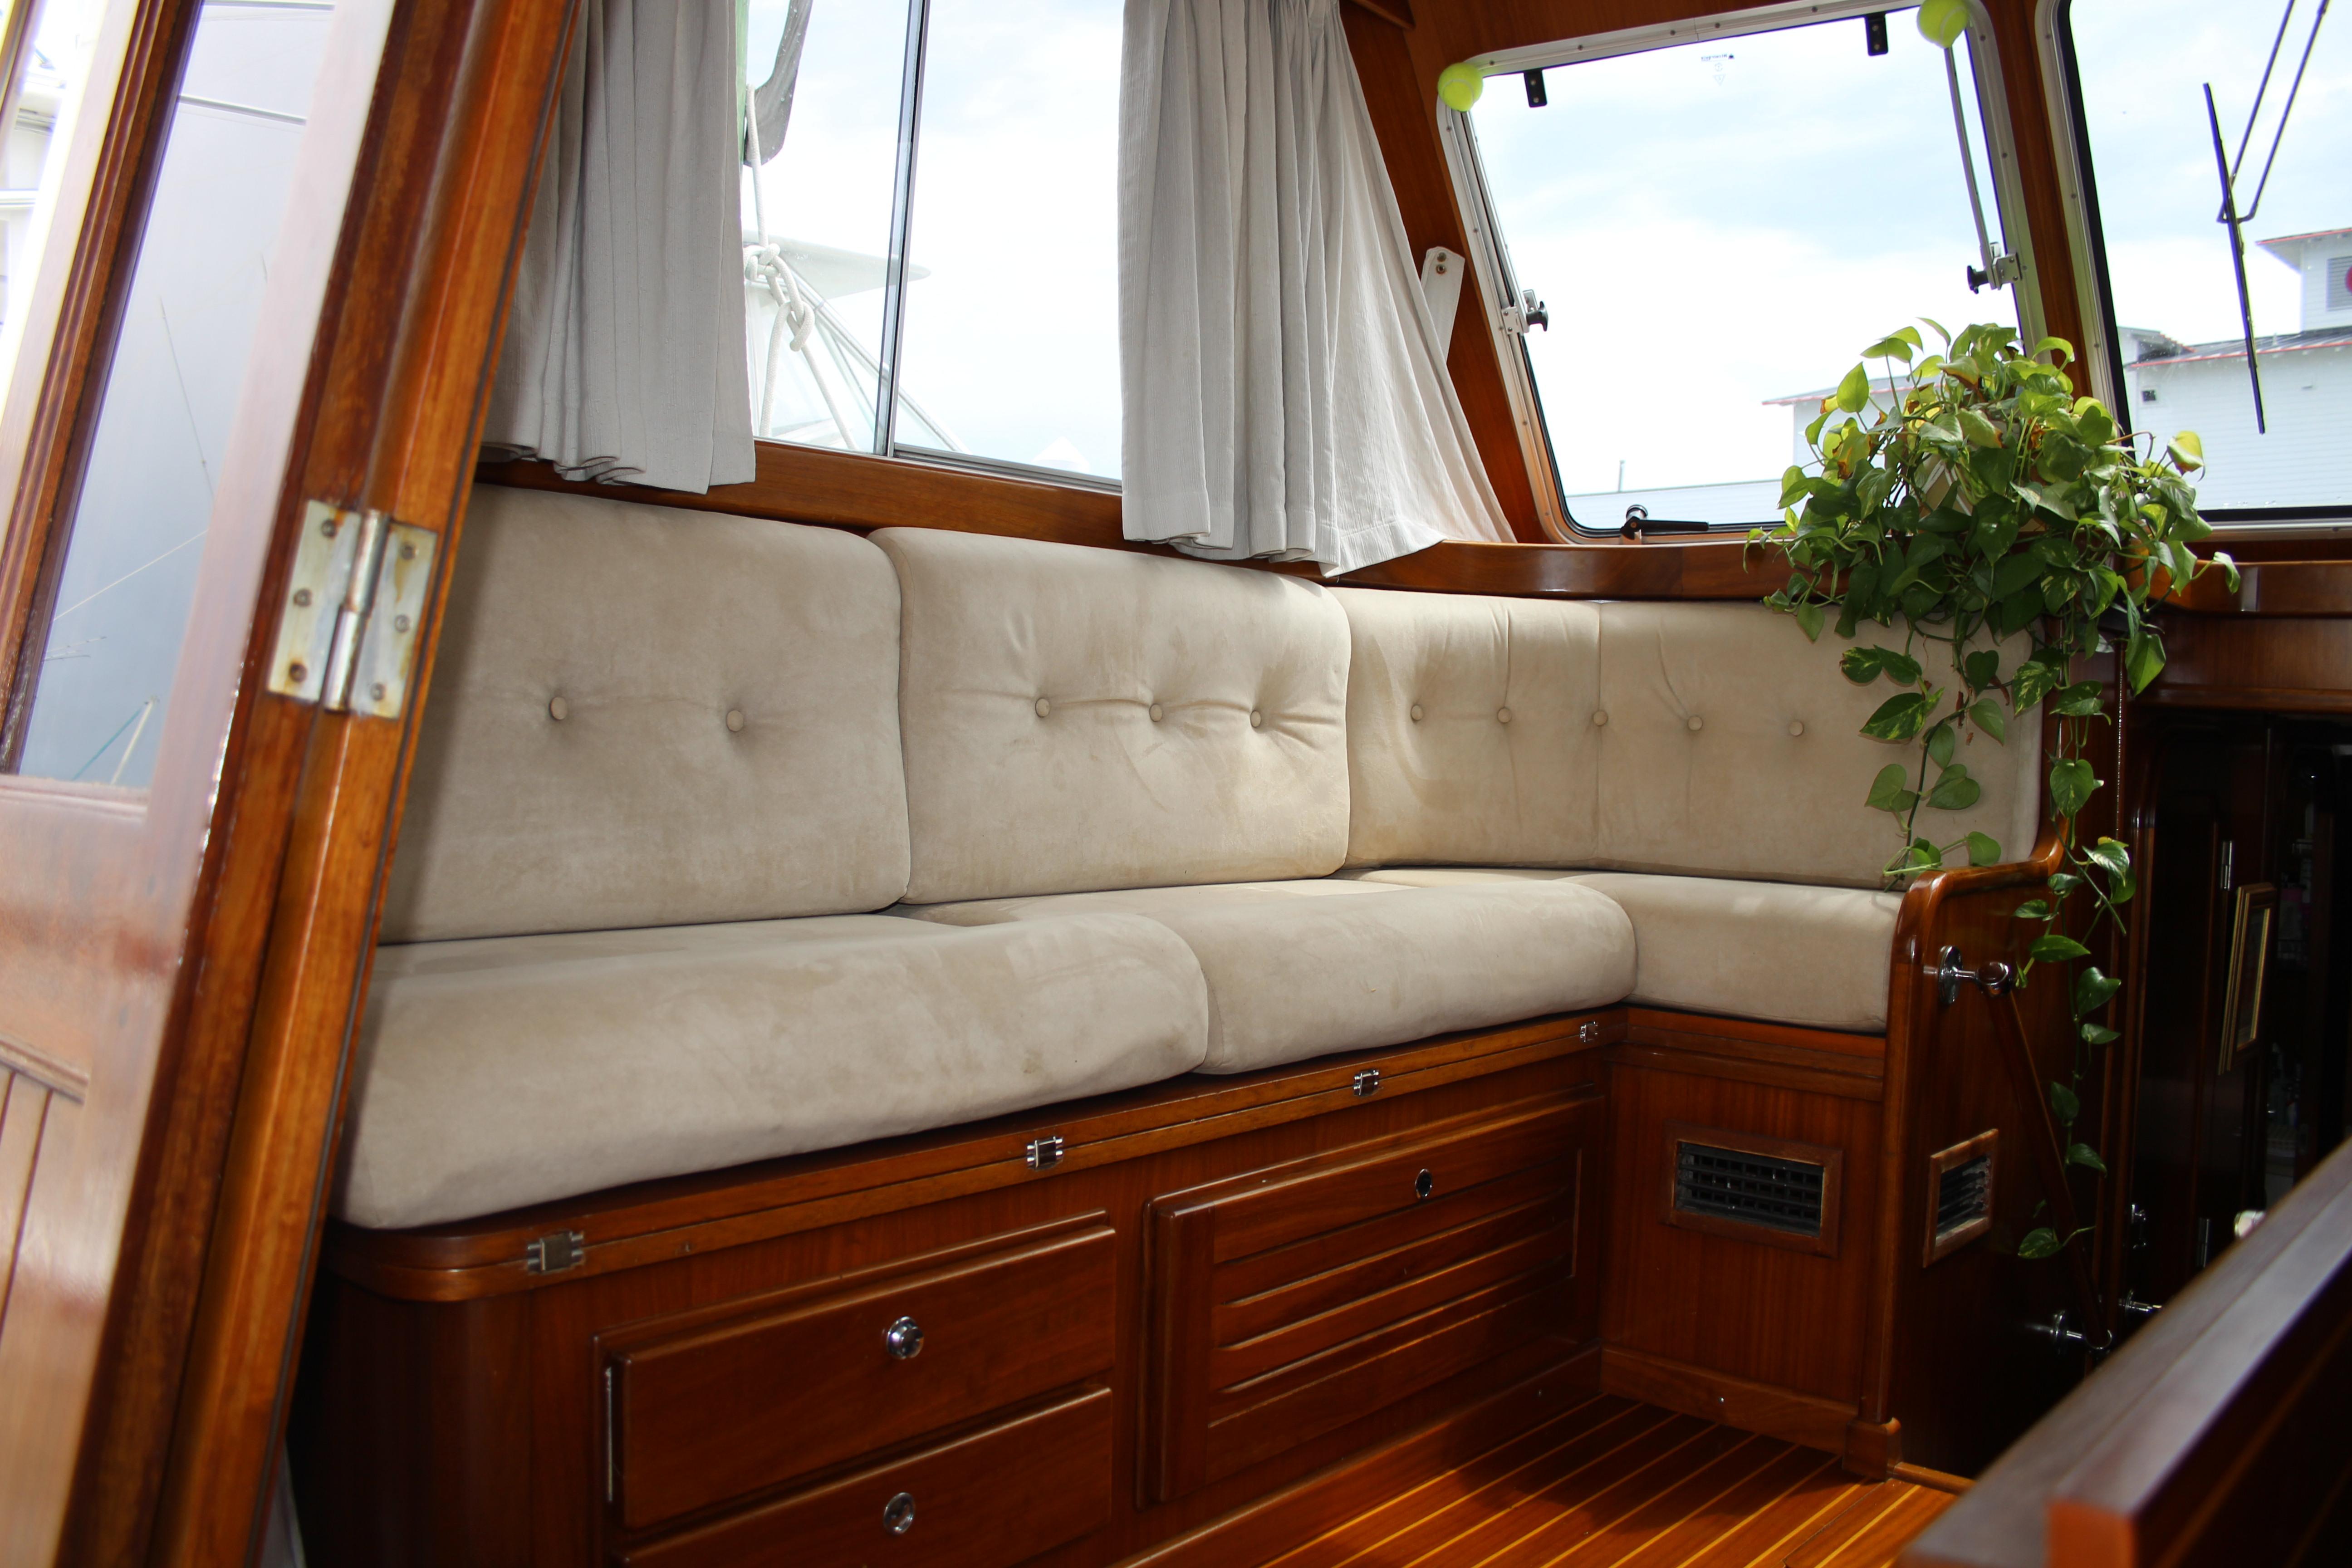 Pilothouse Berth as a Couch